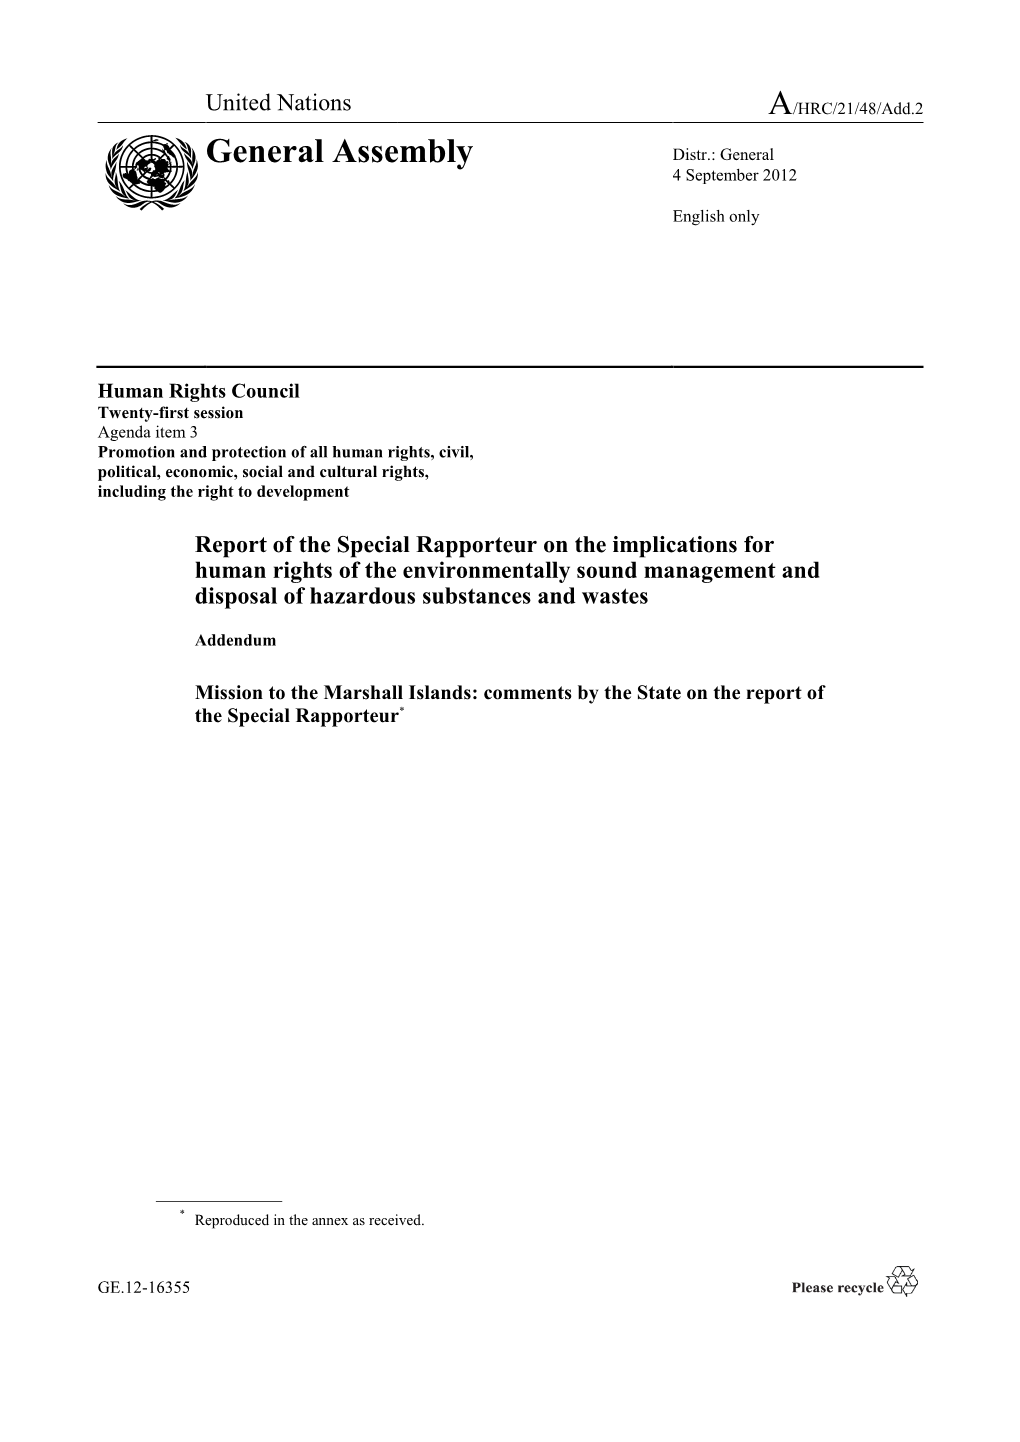 Mission to the Marshall Islands: Comments by the State on the Report of the Special Rapporteur*